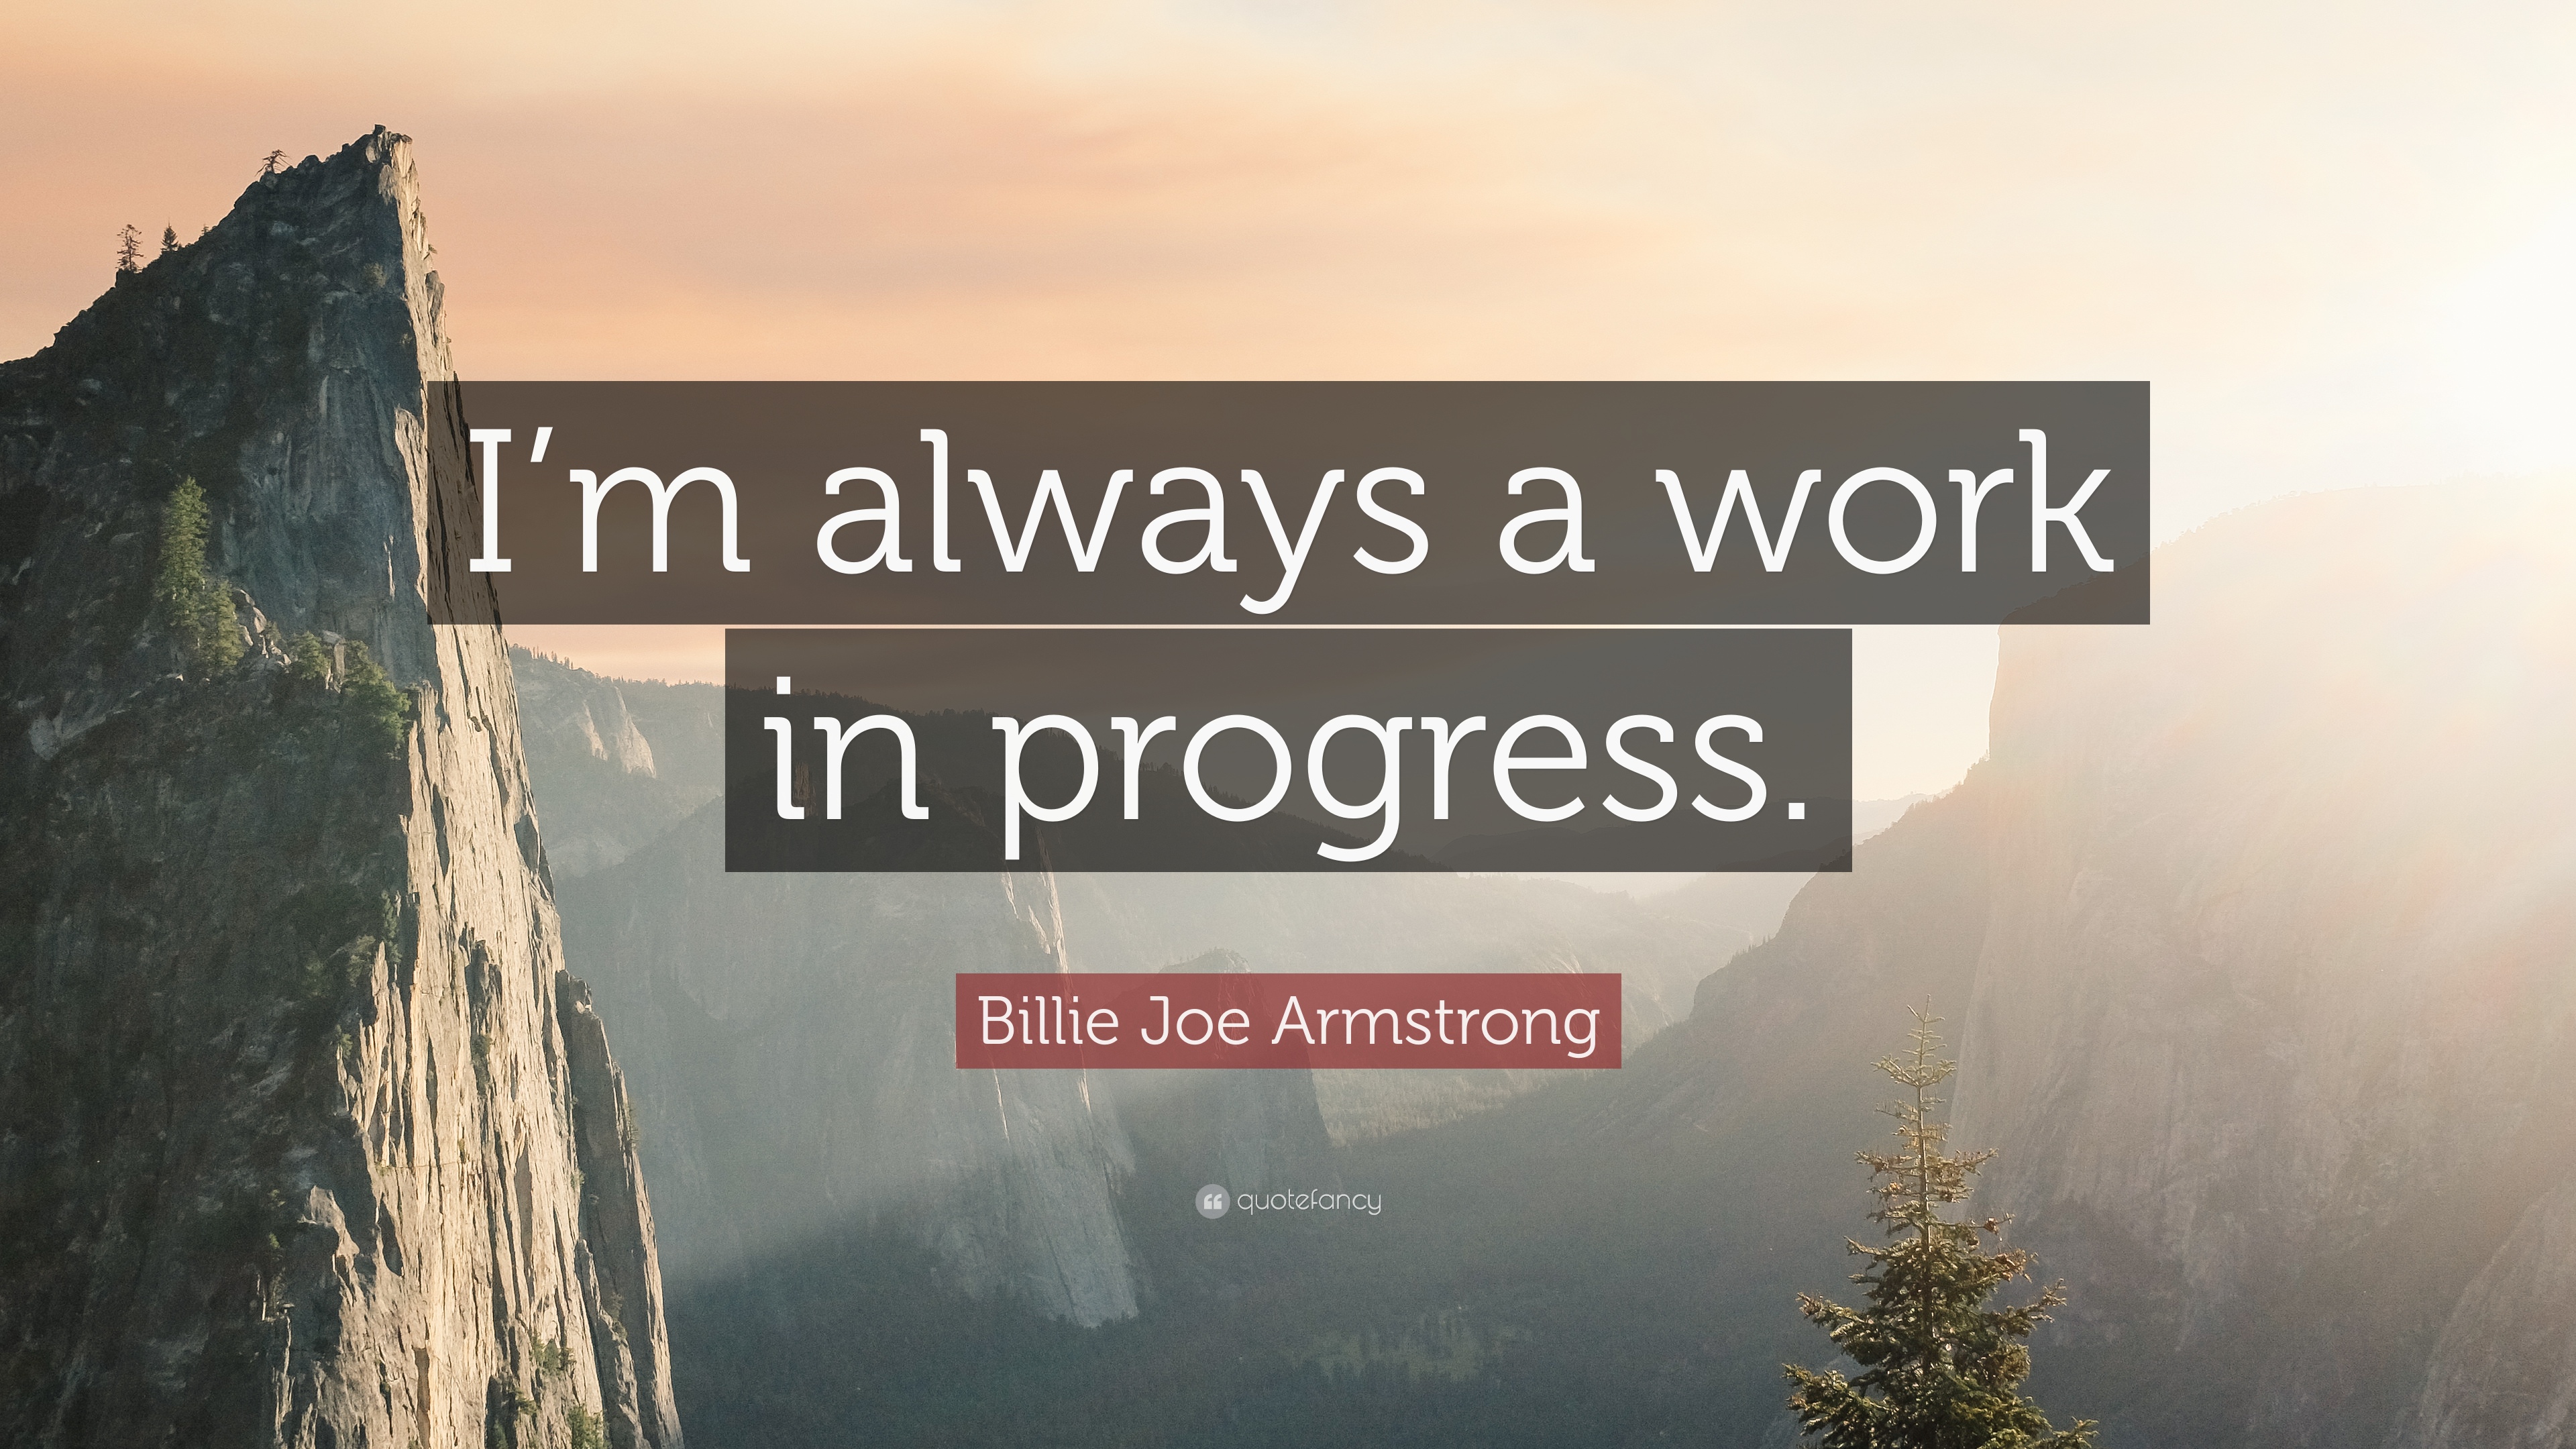 Billie Joe Armstrong Quote: “I'm always a work in progress.”